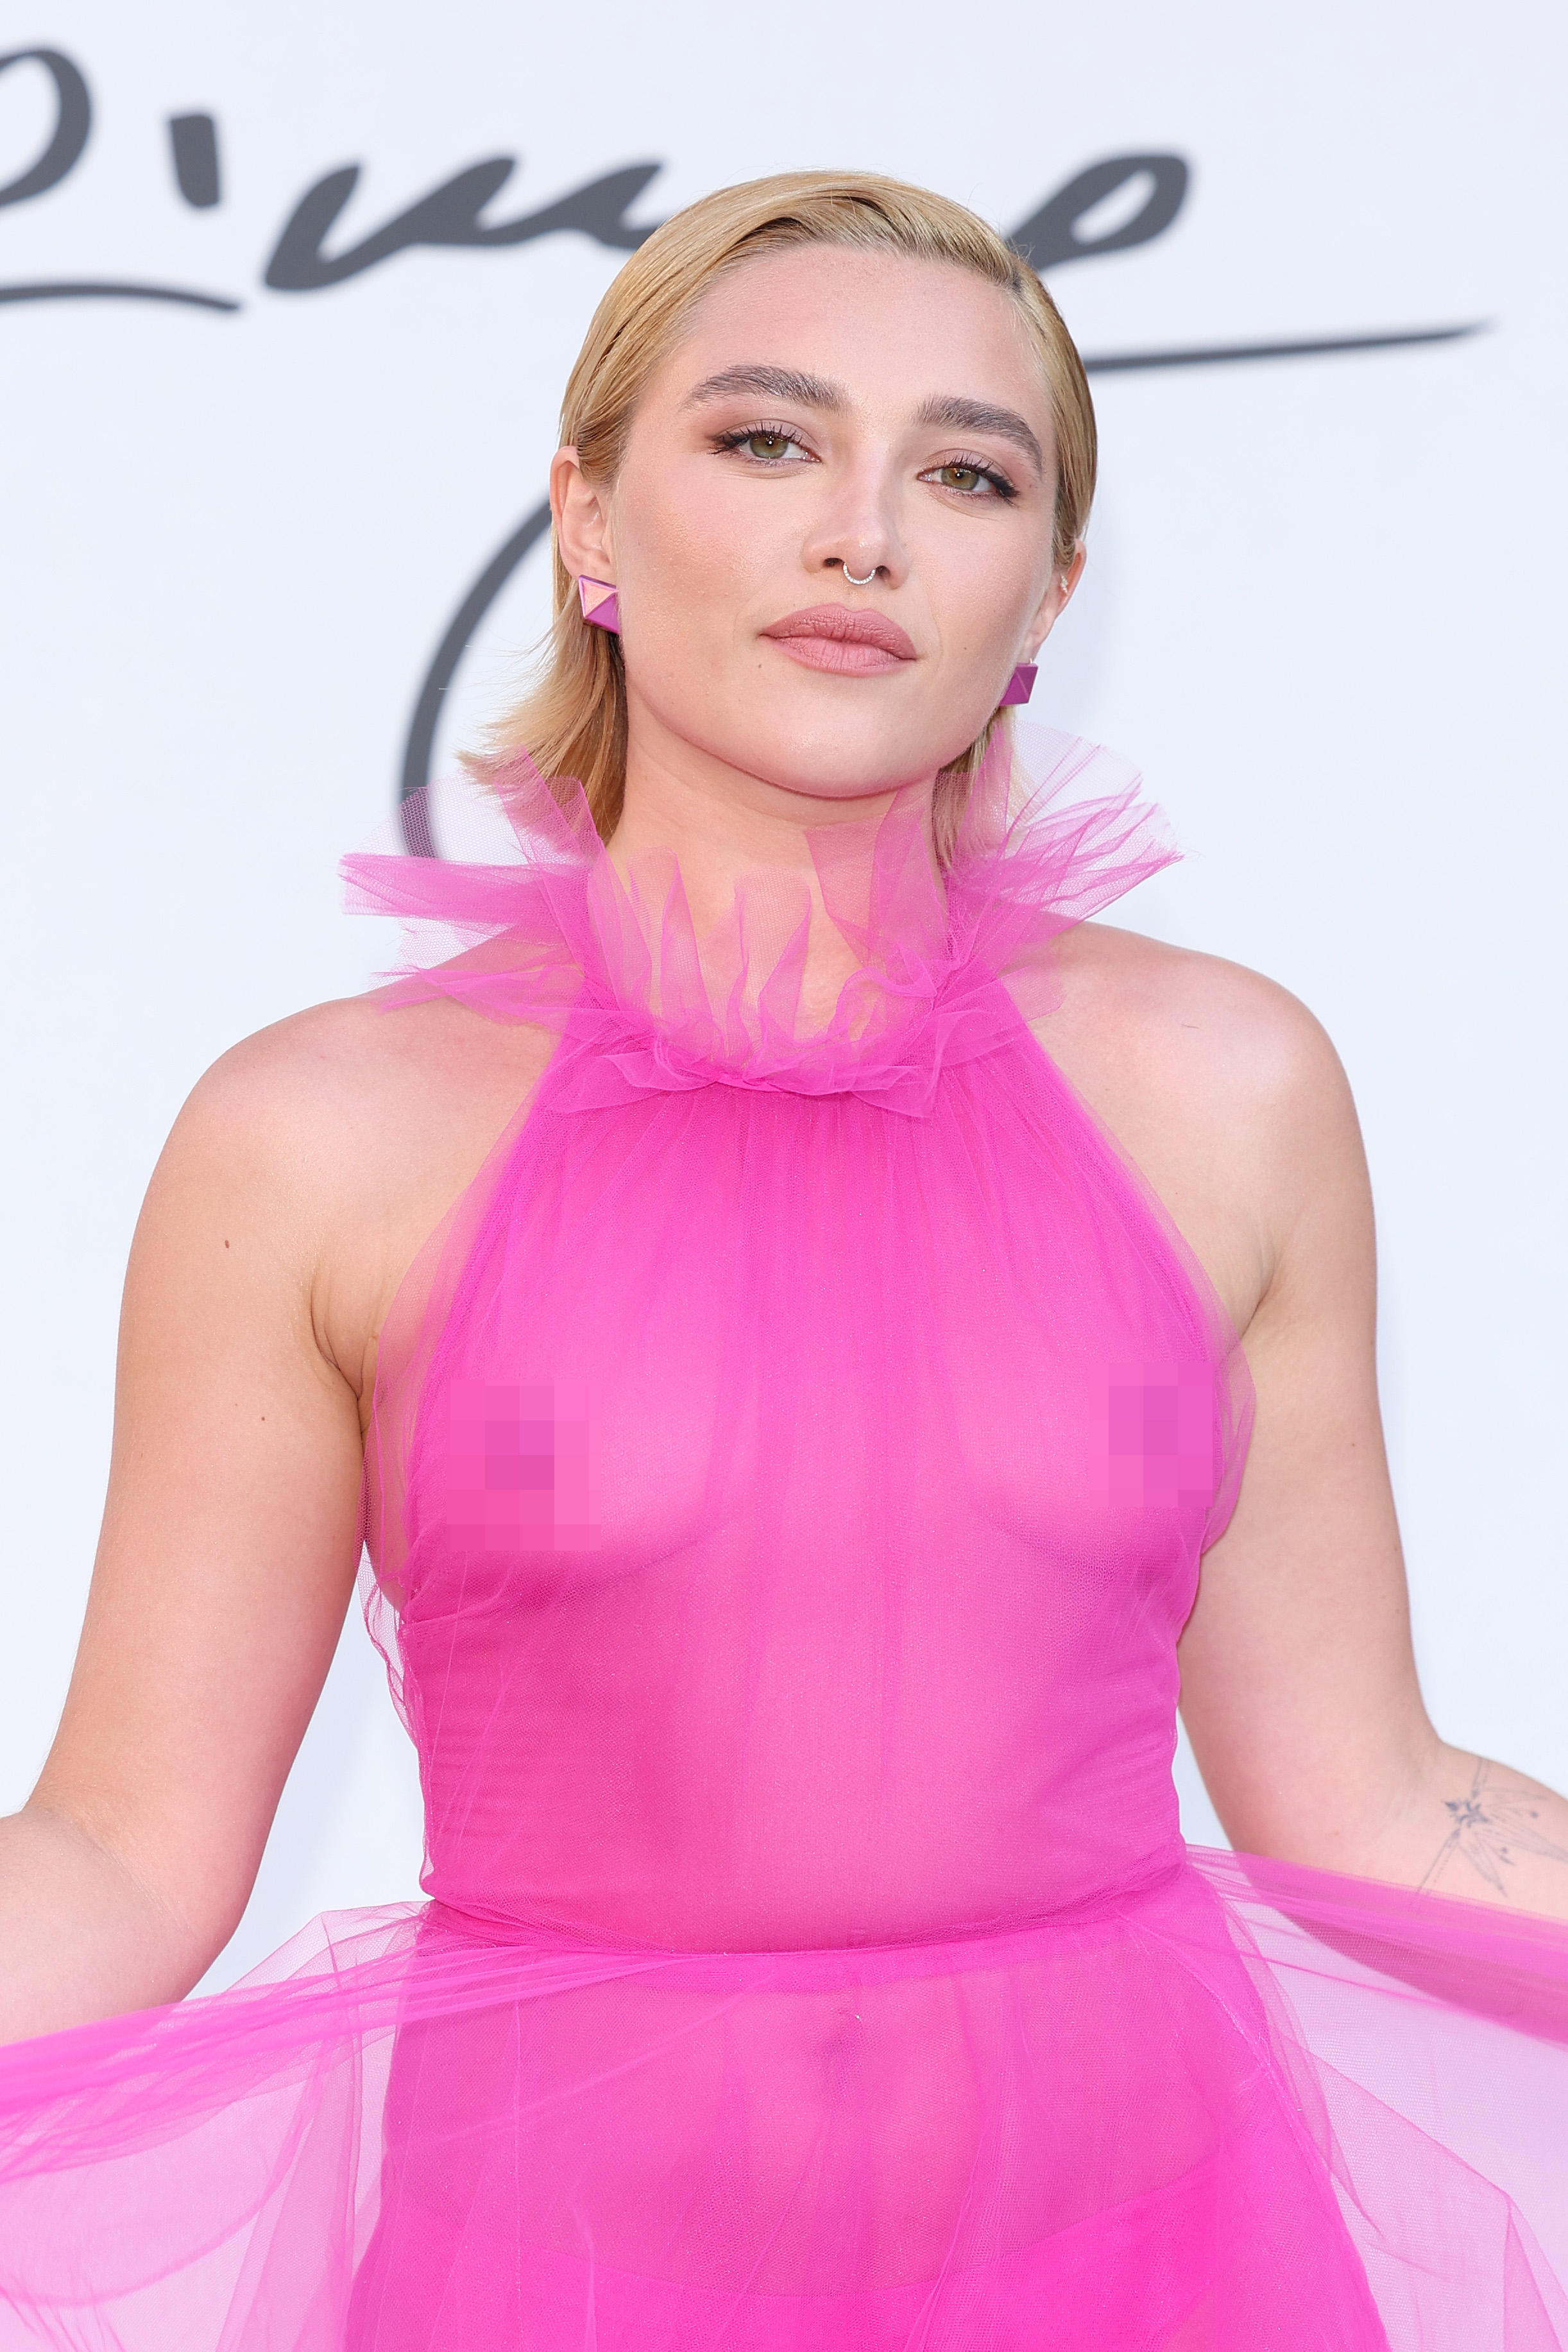 angela hively add florence pugh boobs photo